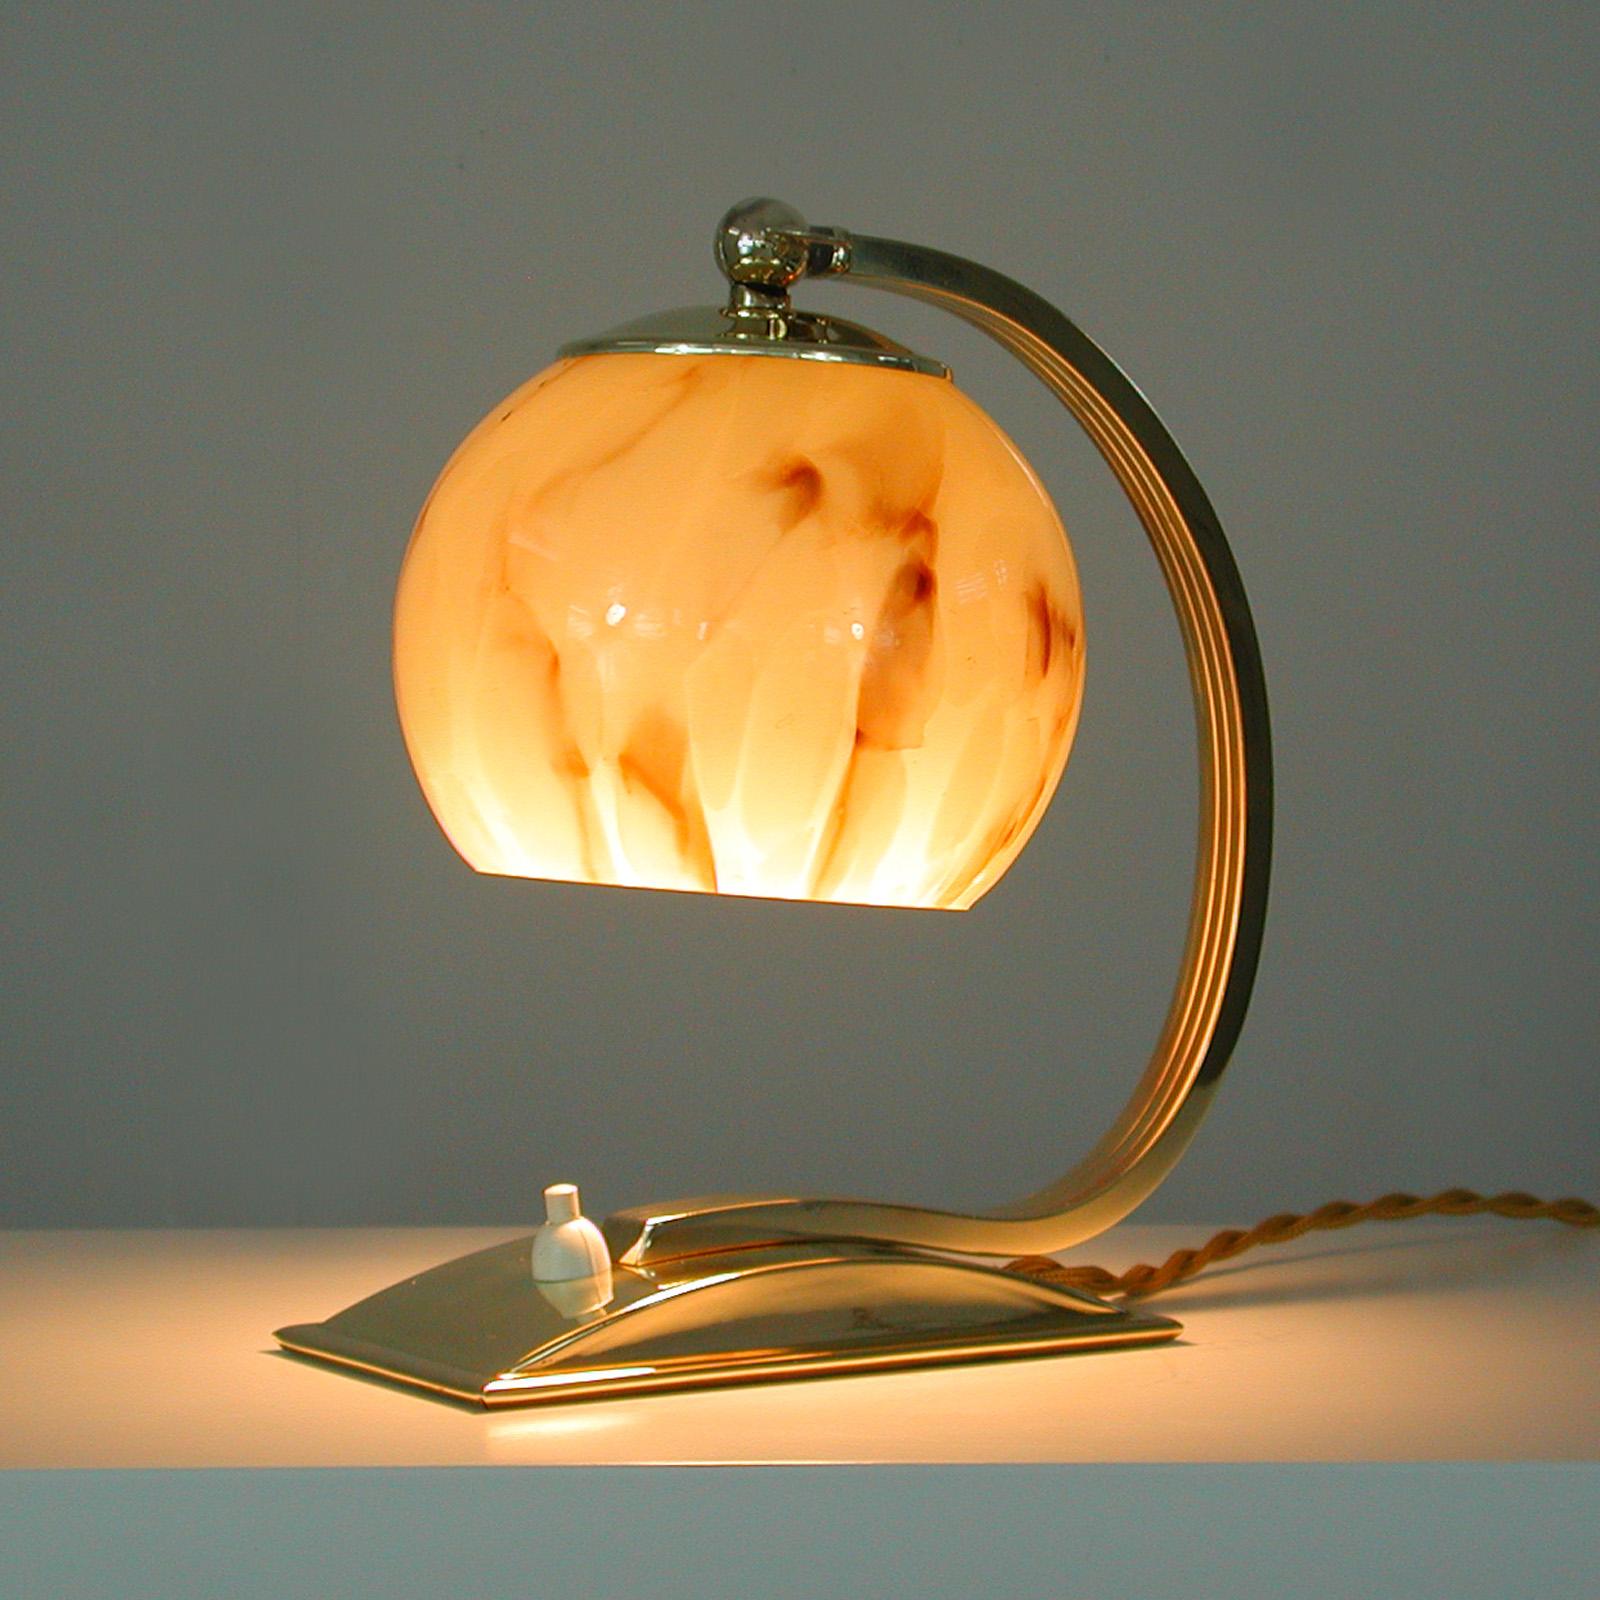 Mid-20th Century German Art Deco Marbled Opaline Glass & Brass Table Lamp, 1930s For Sale